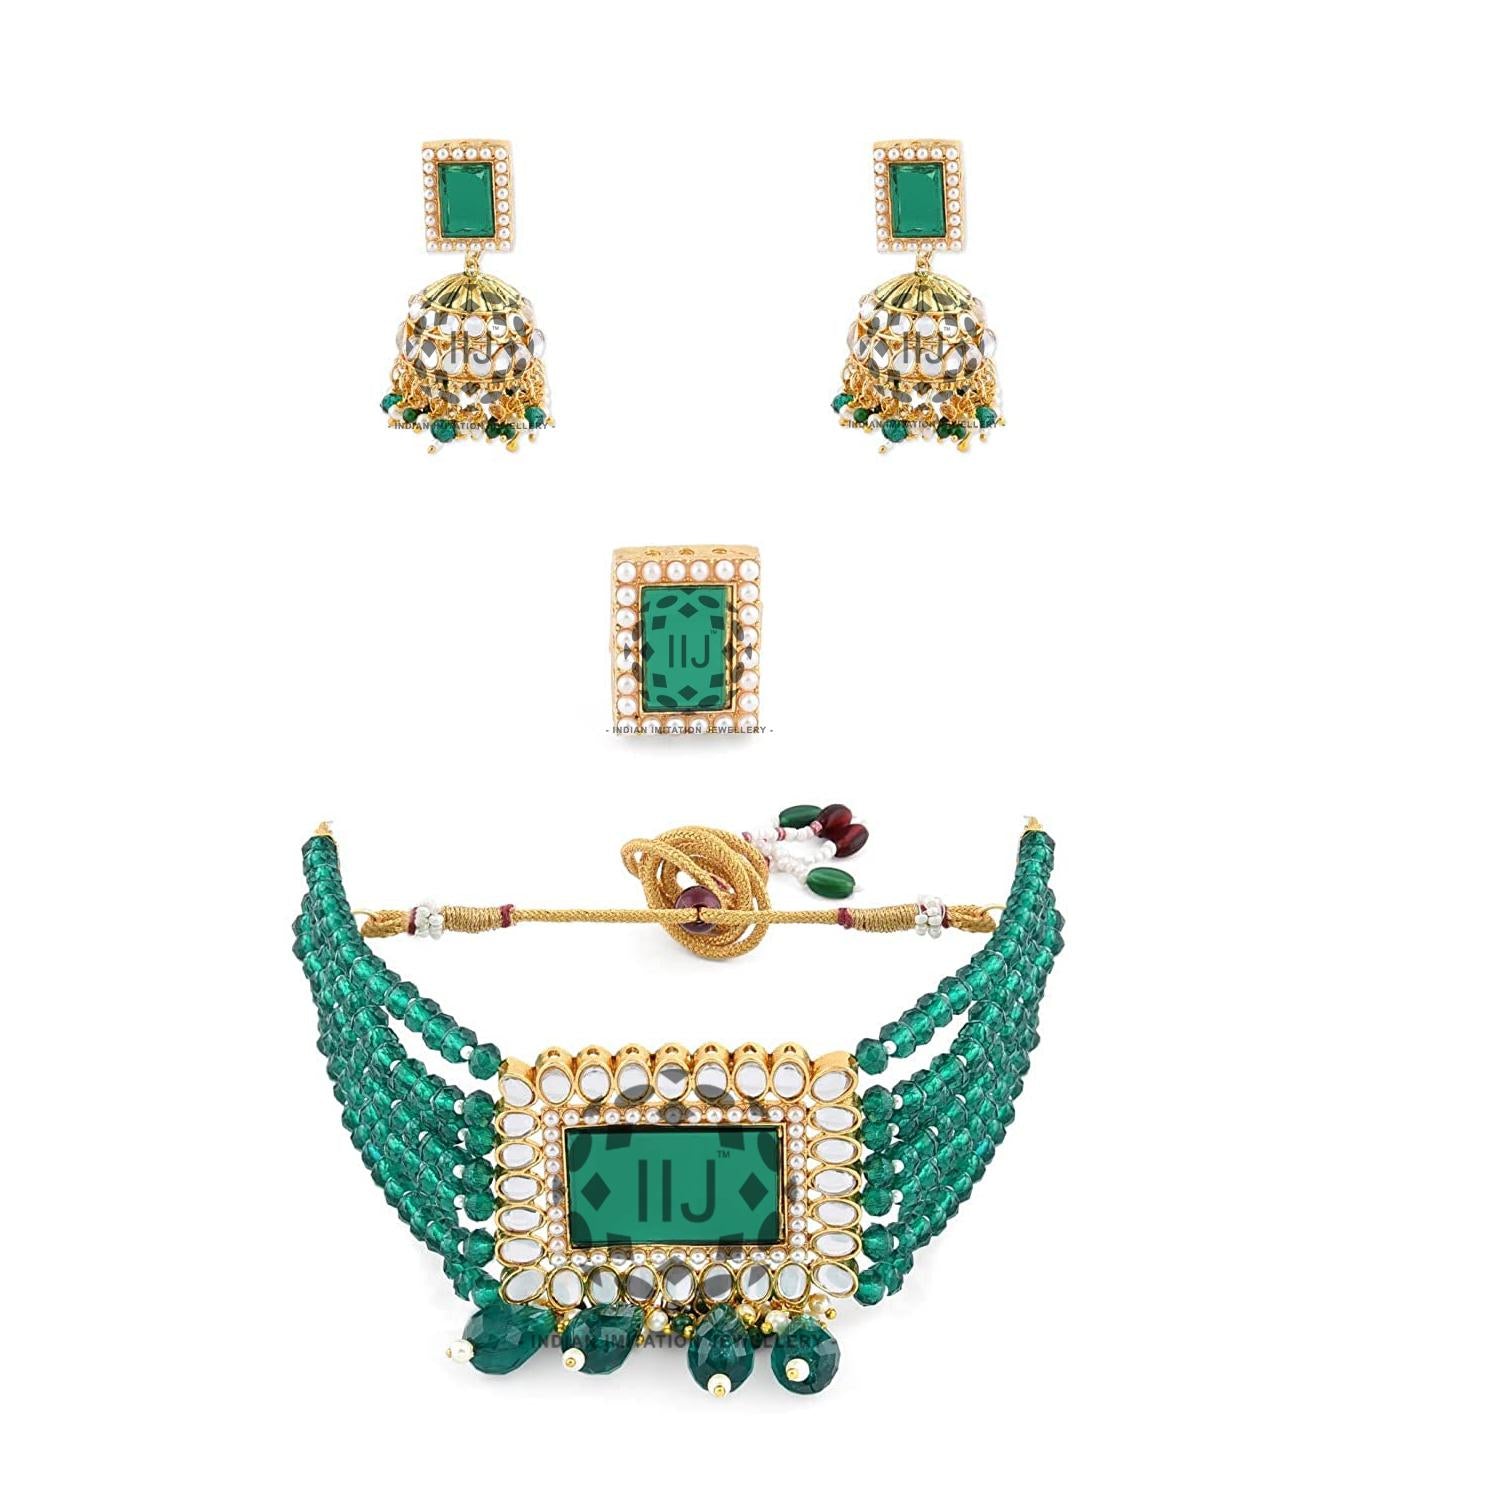 Chokar and necklace set with earing